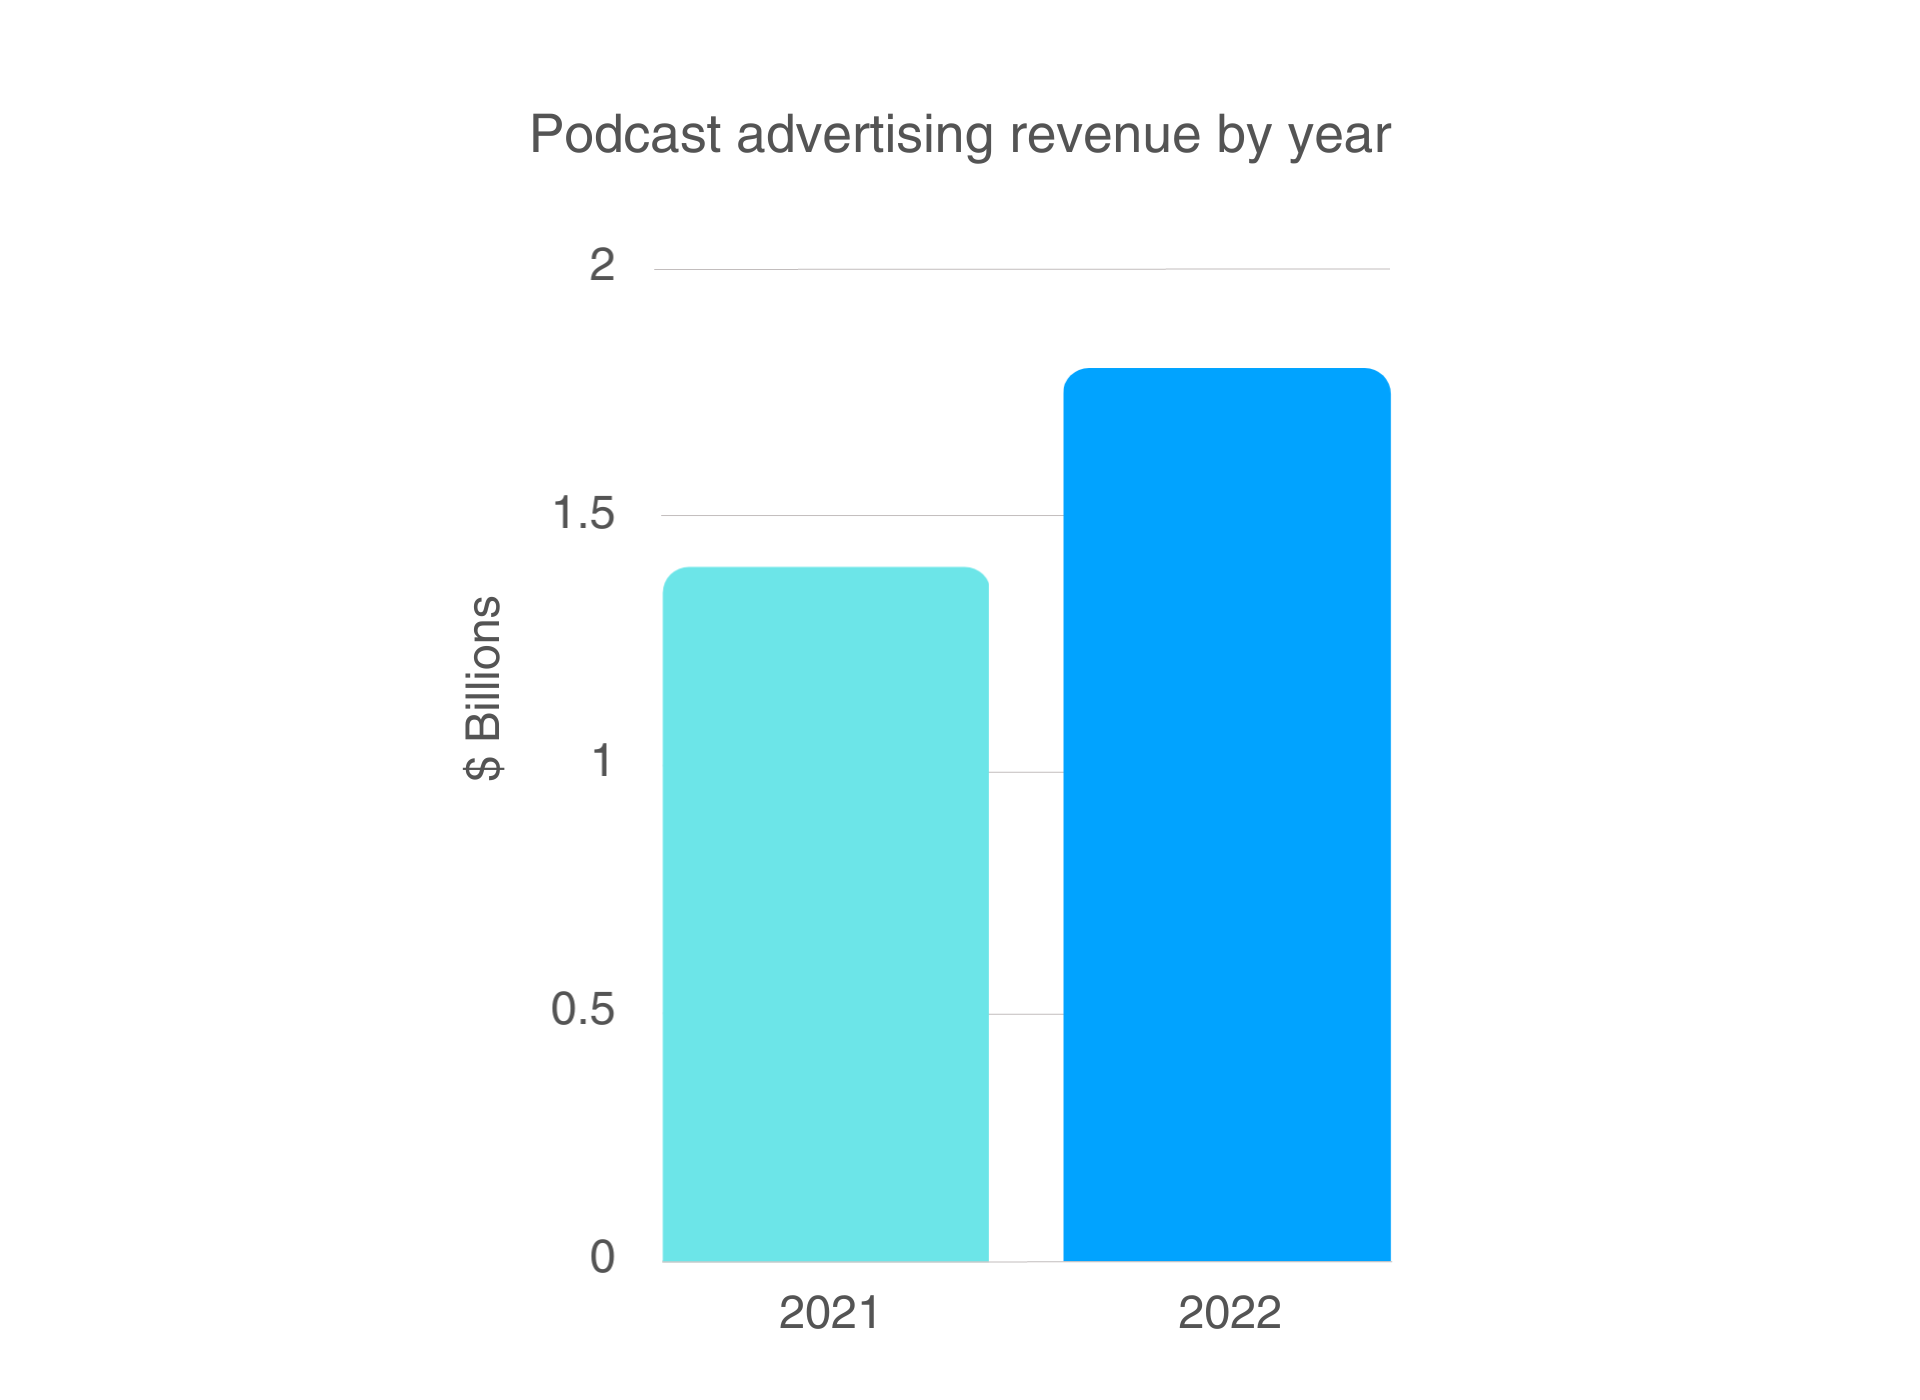 US podcast advertising revenue by year